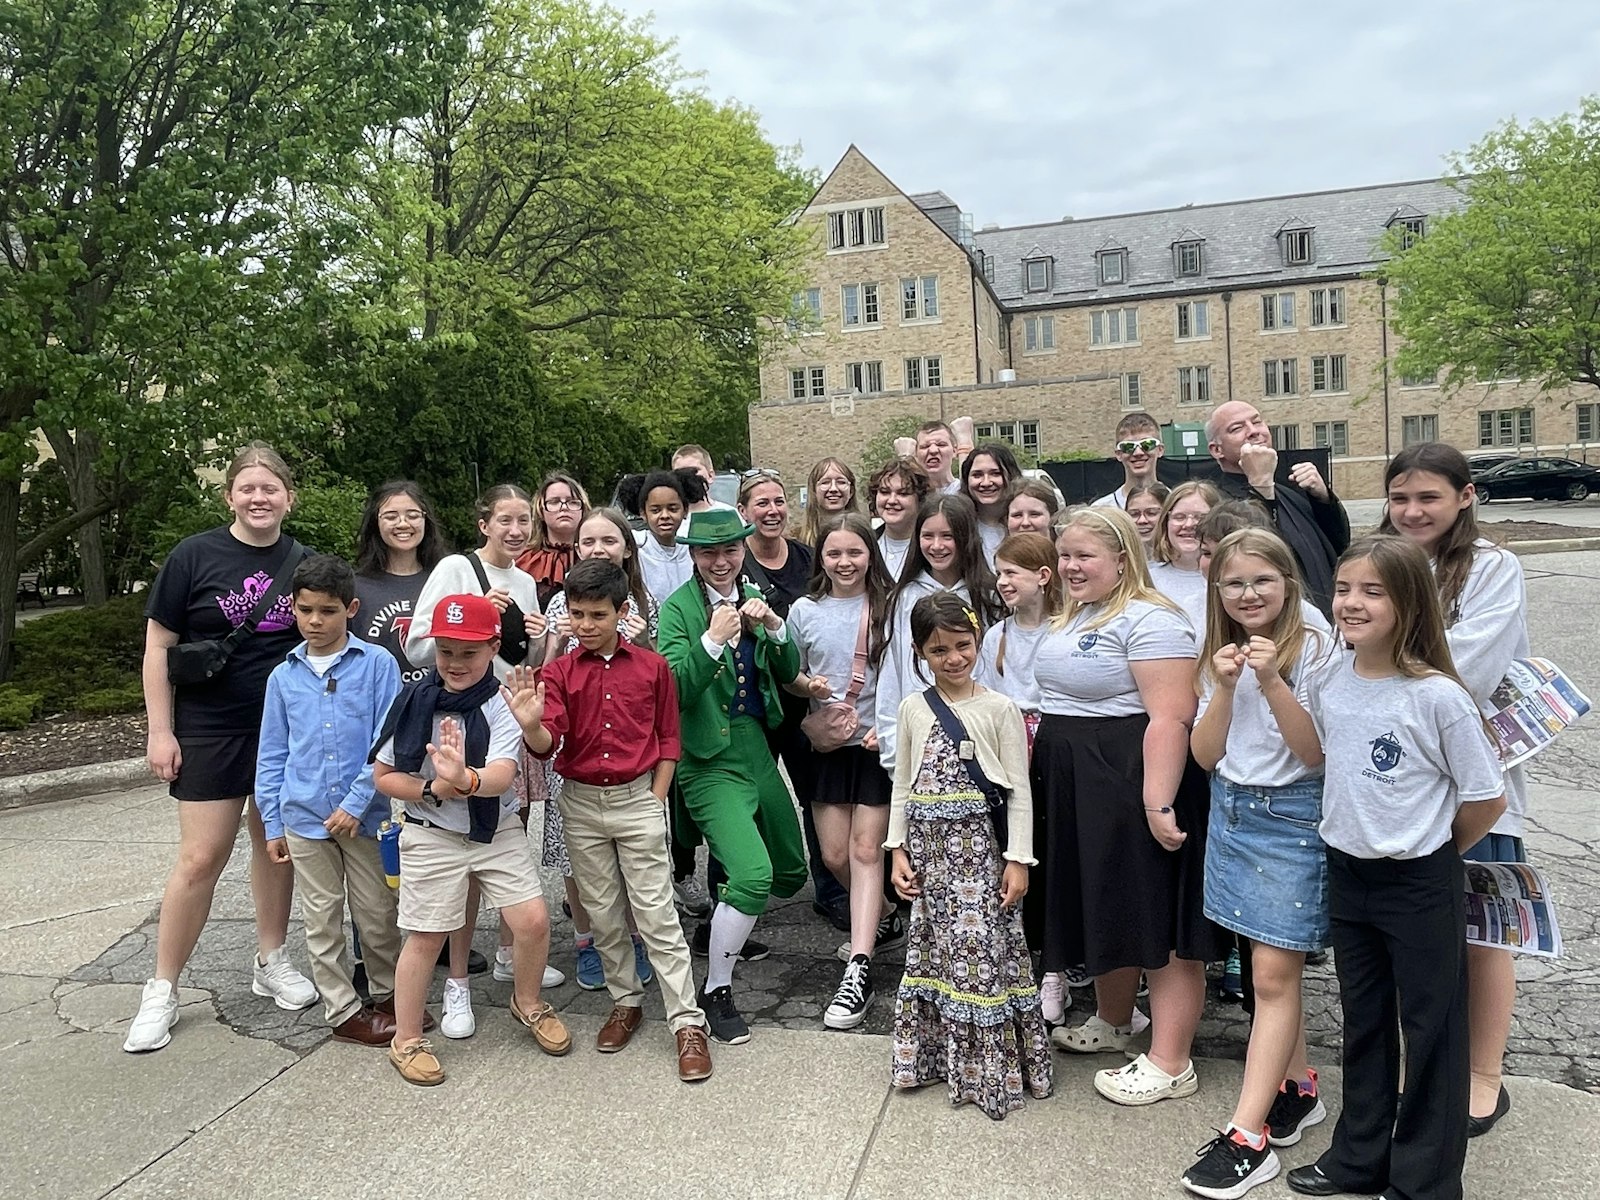 Students were enthusiastic about the opportunity to tour Notre Dame's campus, as well as the opportunity to showcase their voices in the beautiful basilica.